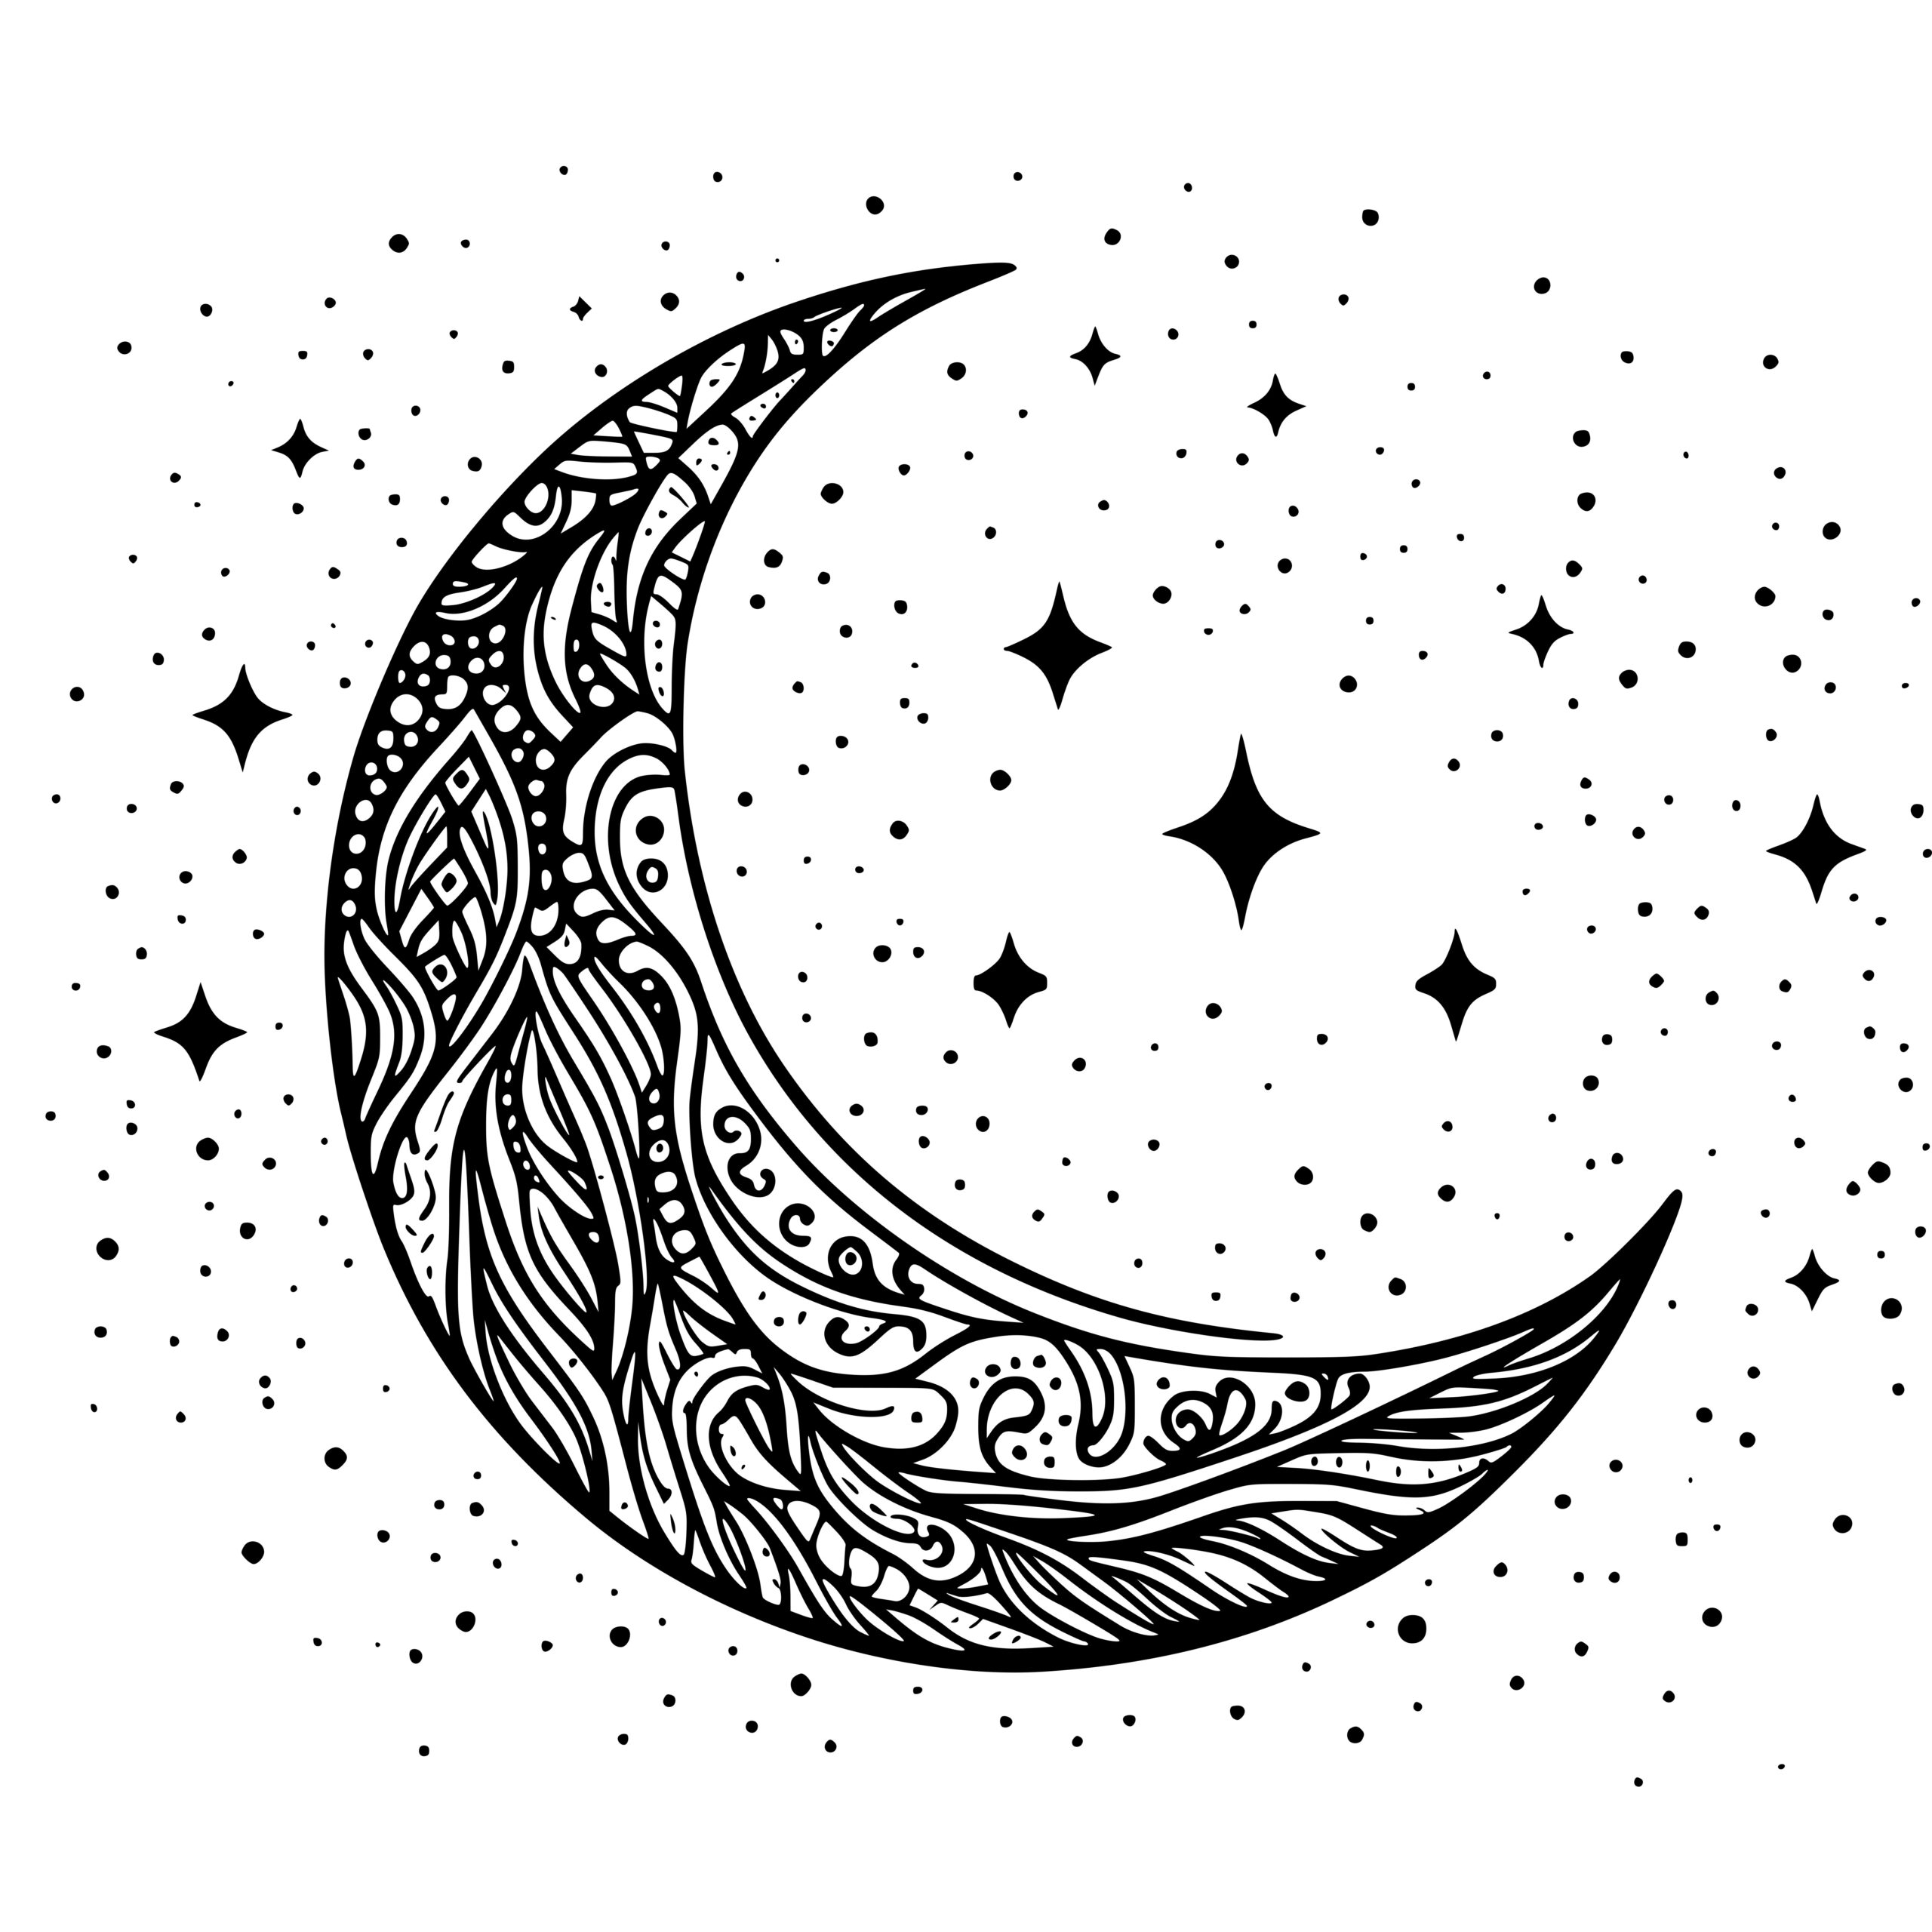 Starry Crescent Night SVG File for Cricut, Laser, Silhouette, Cameo